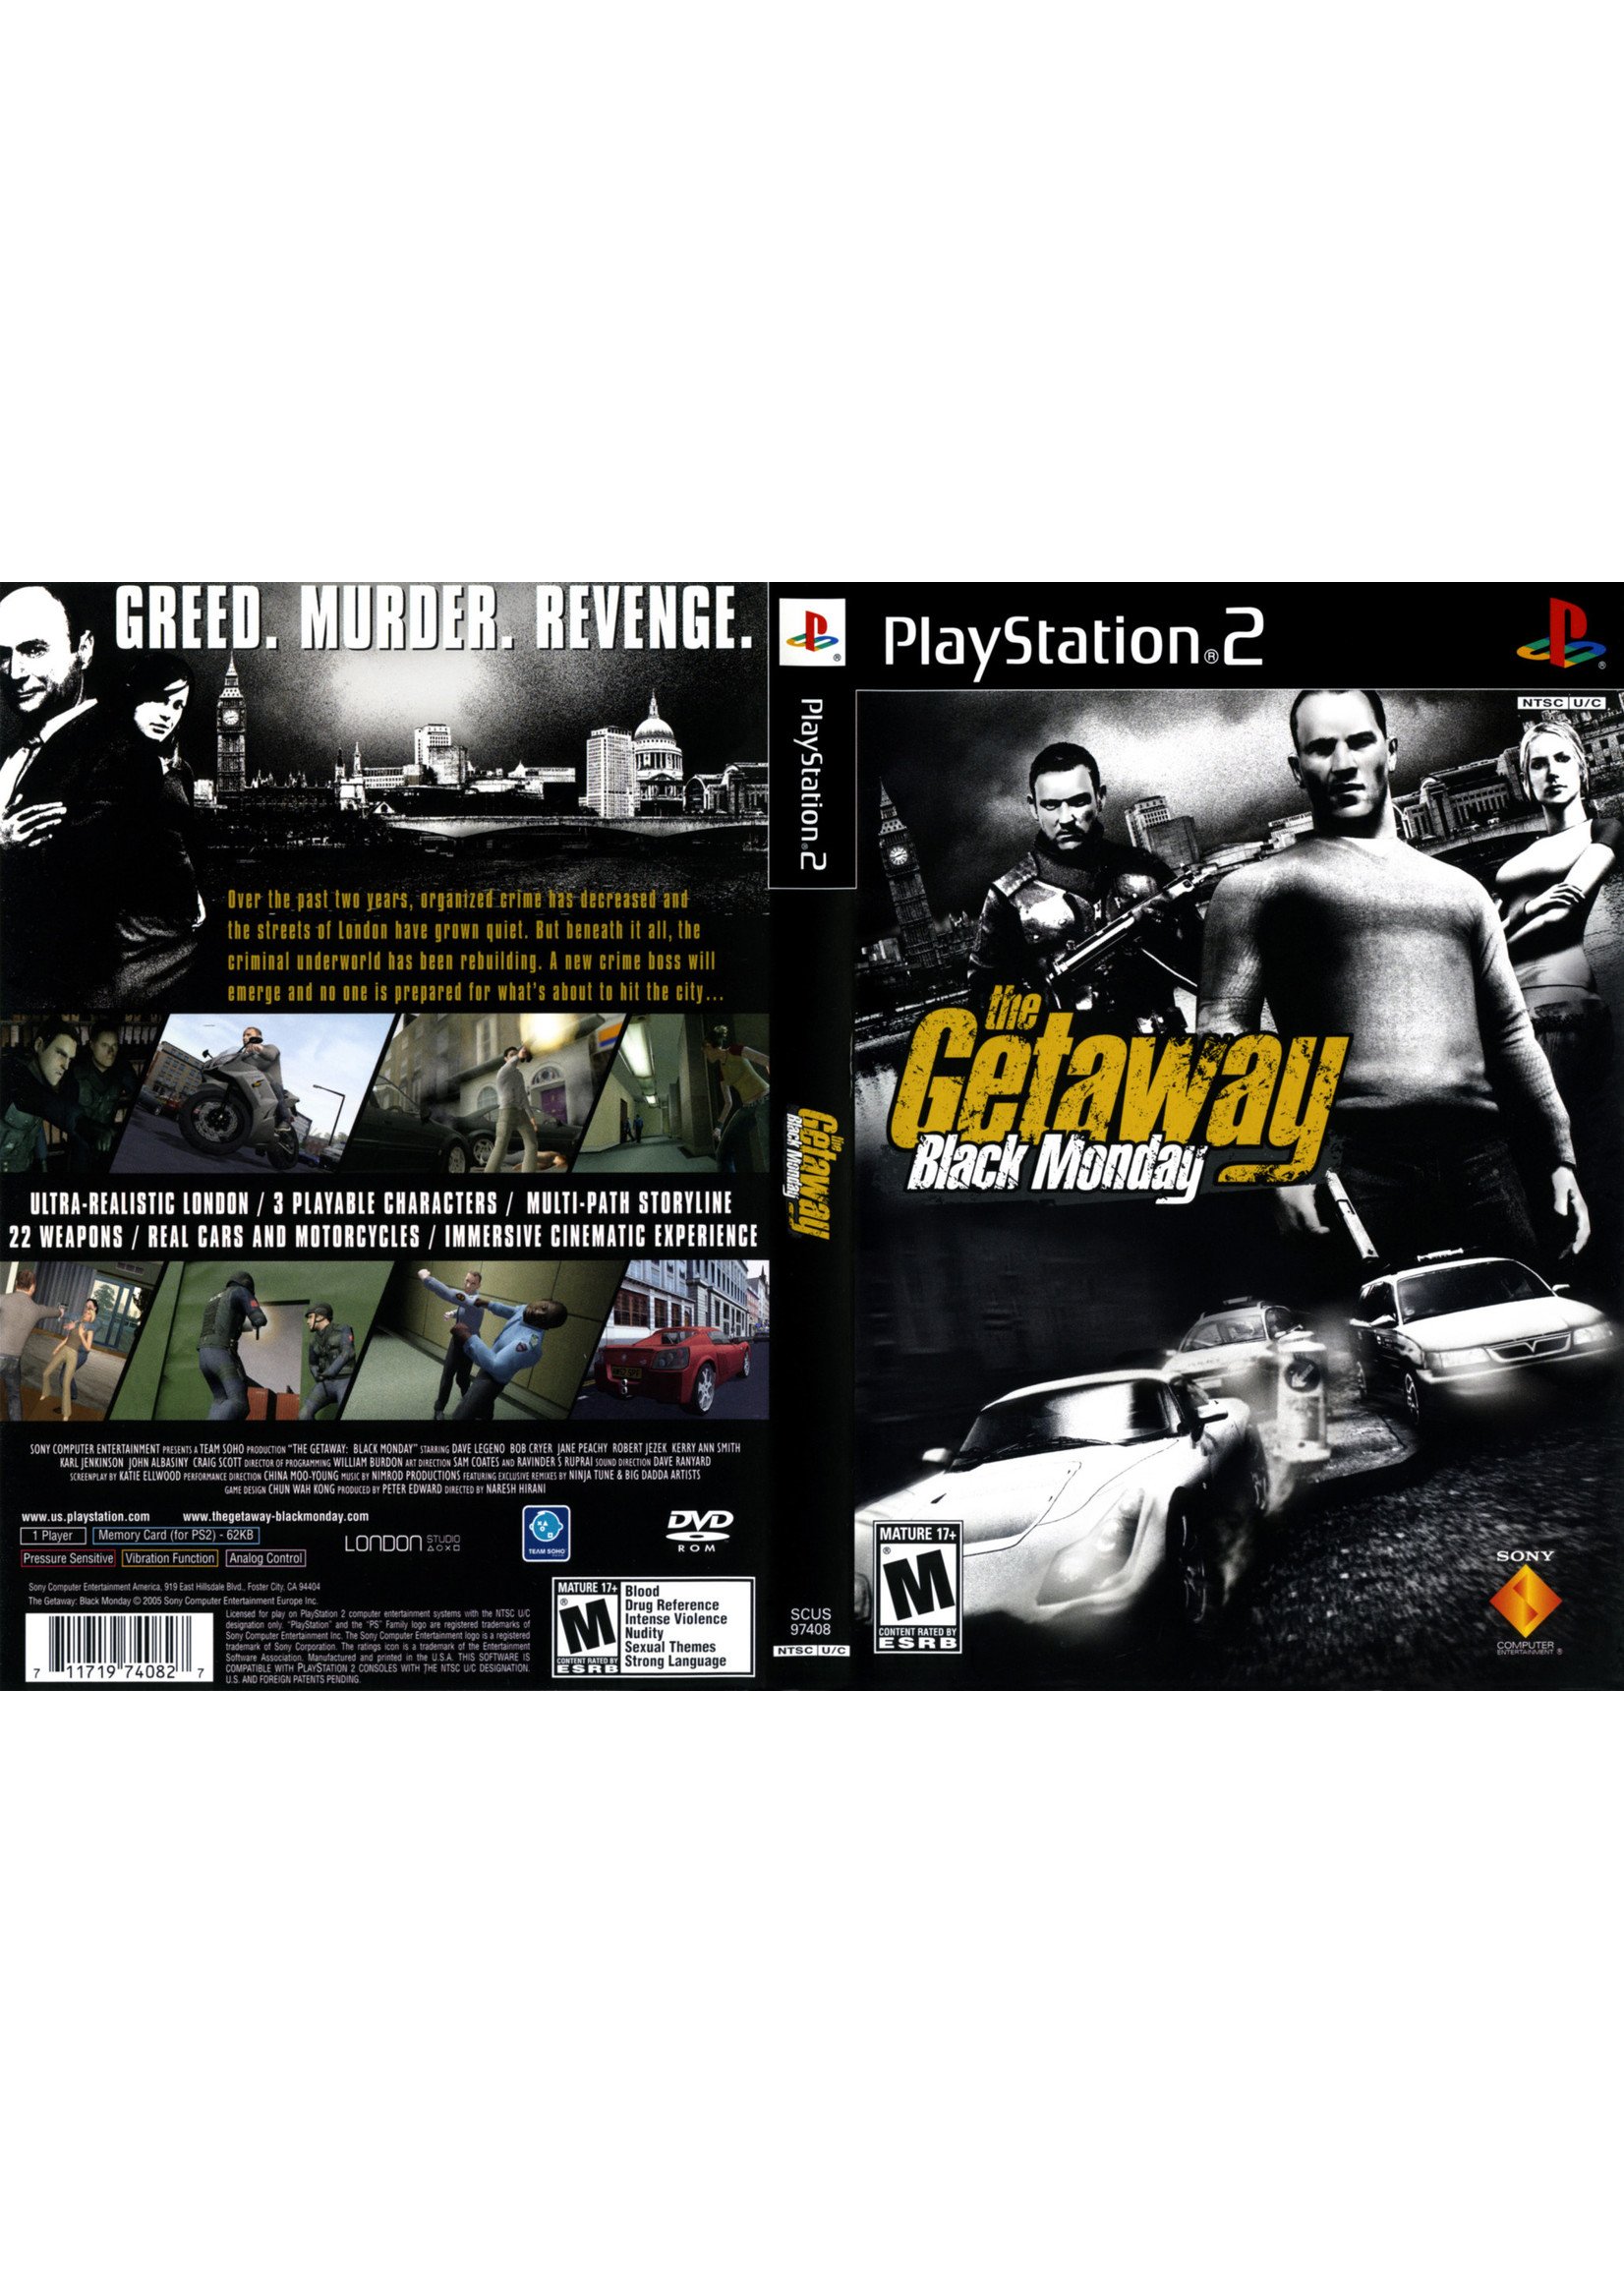 Sony Playstation 2 (PS2) Getaway Black Monday, The